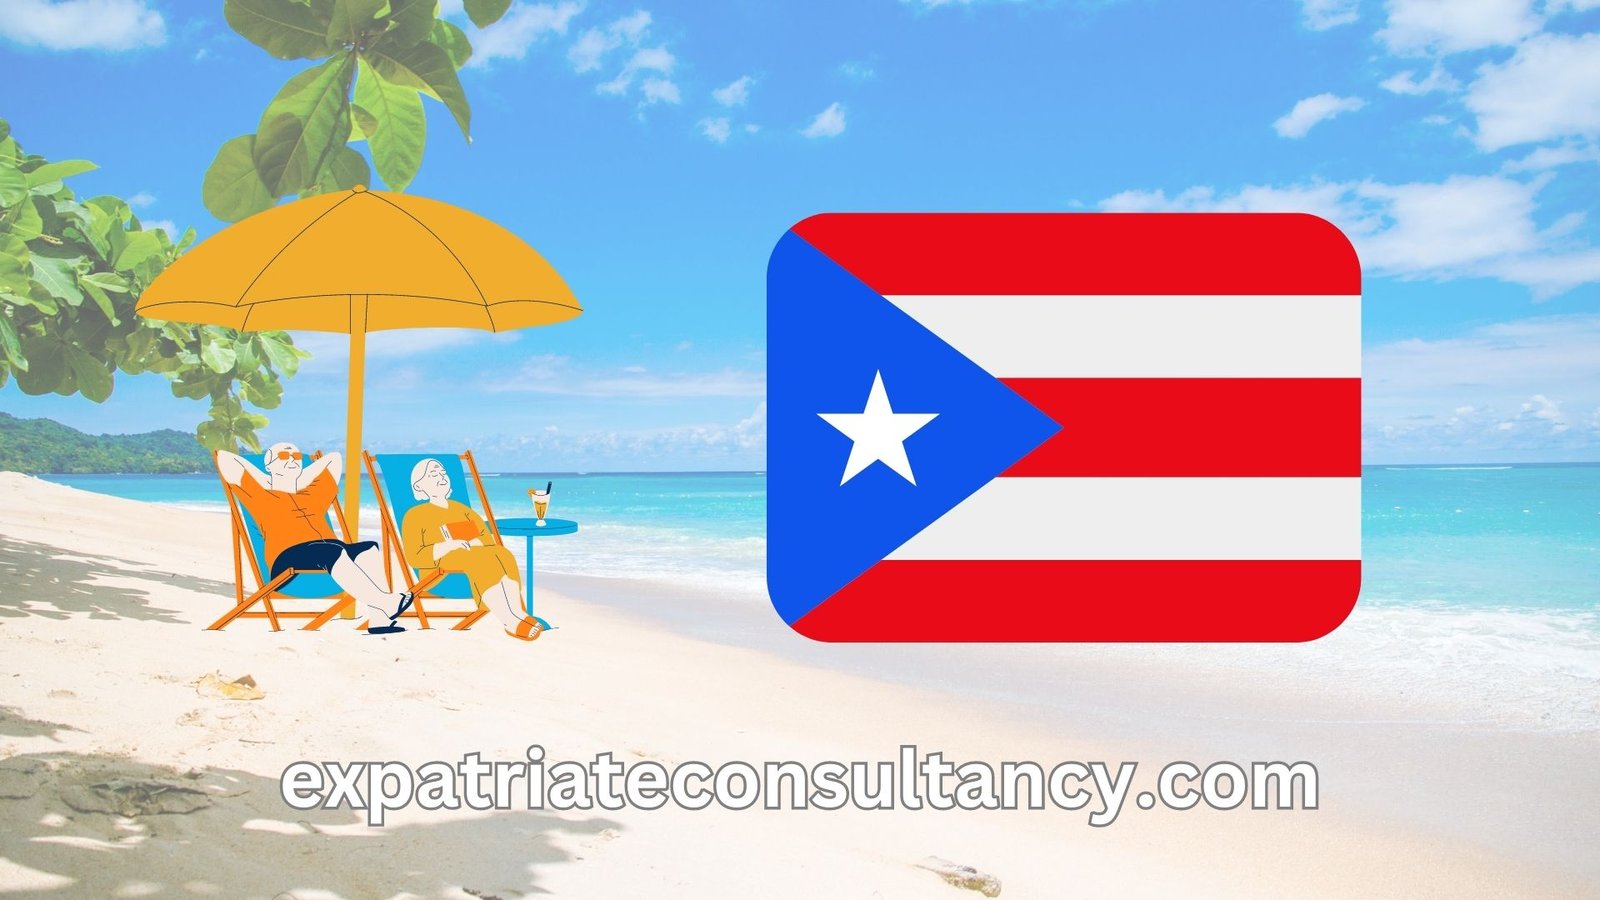 Illustration for an article about retire in Puerto Rico